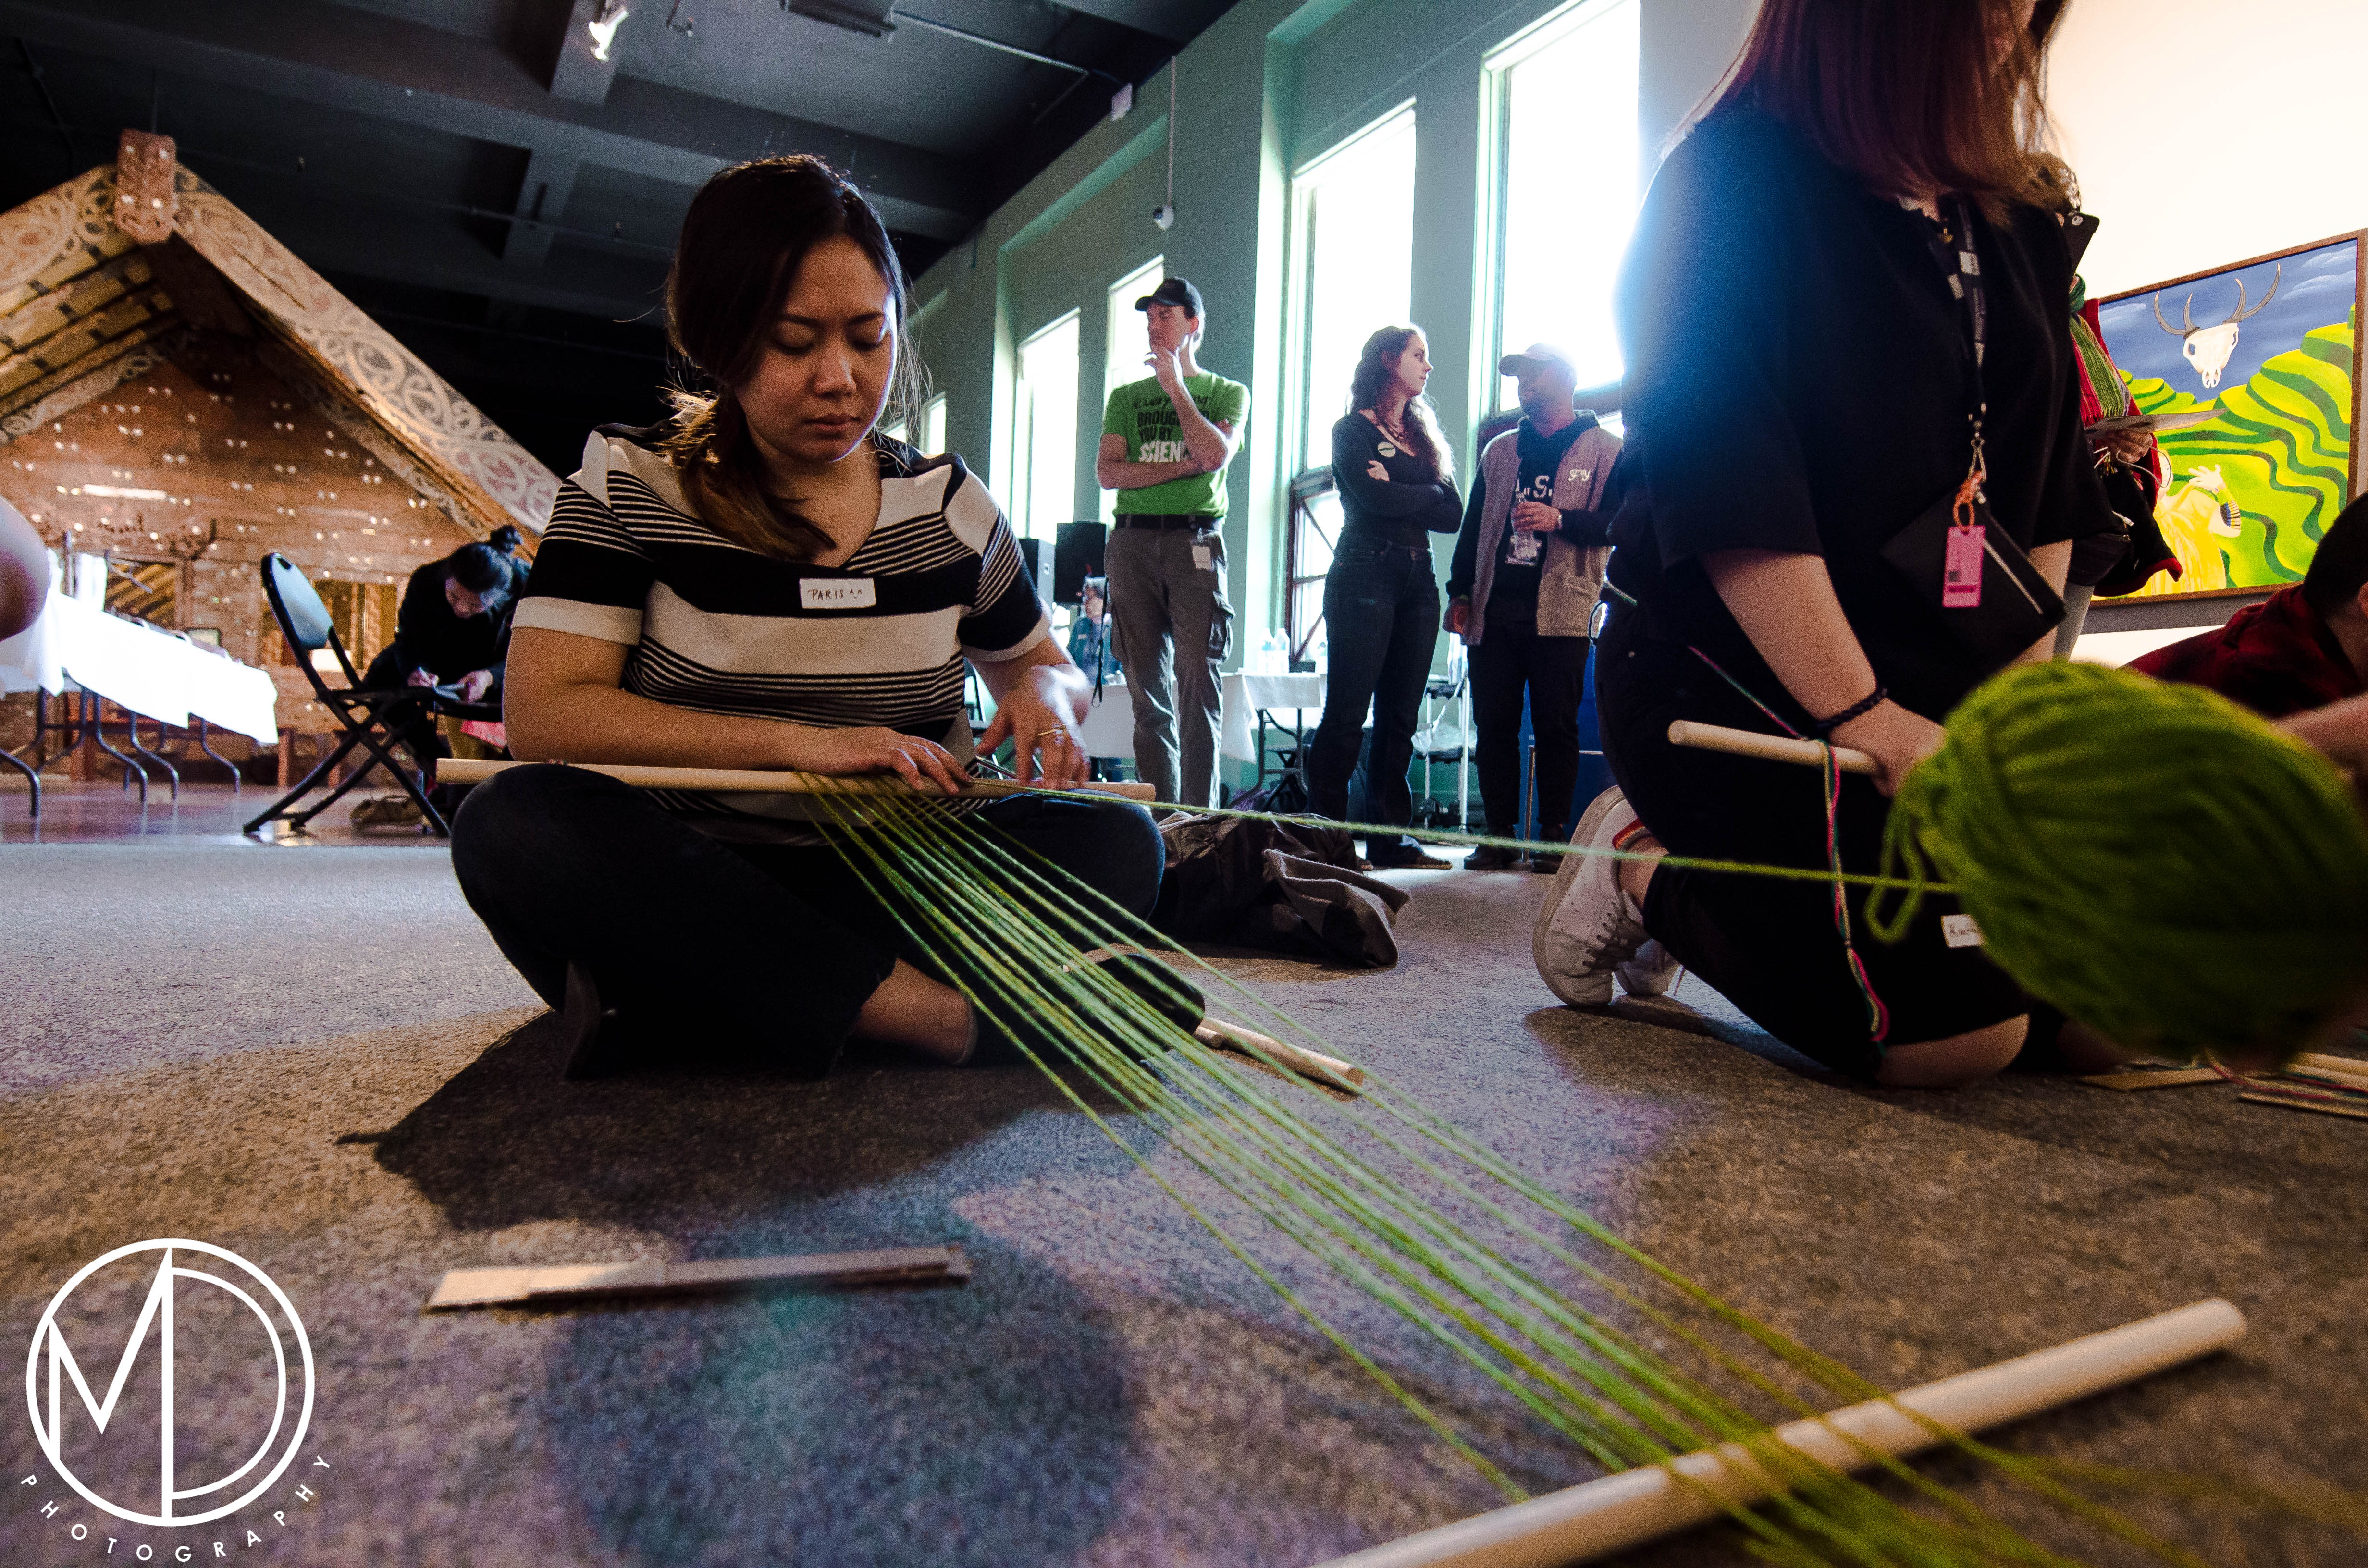 Guest participating in the weaving activity. (c) Field Museum of Natural History - CC BY-NC 4.0